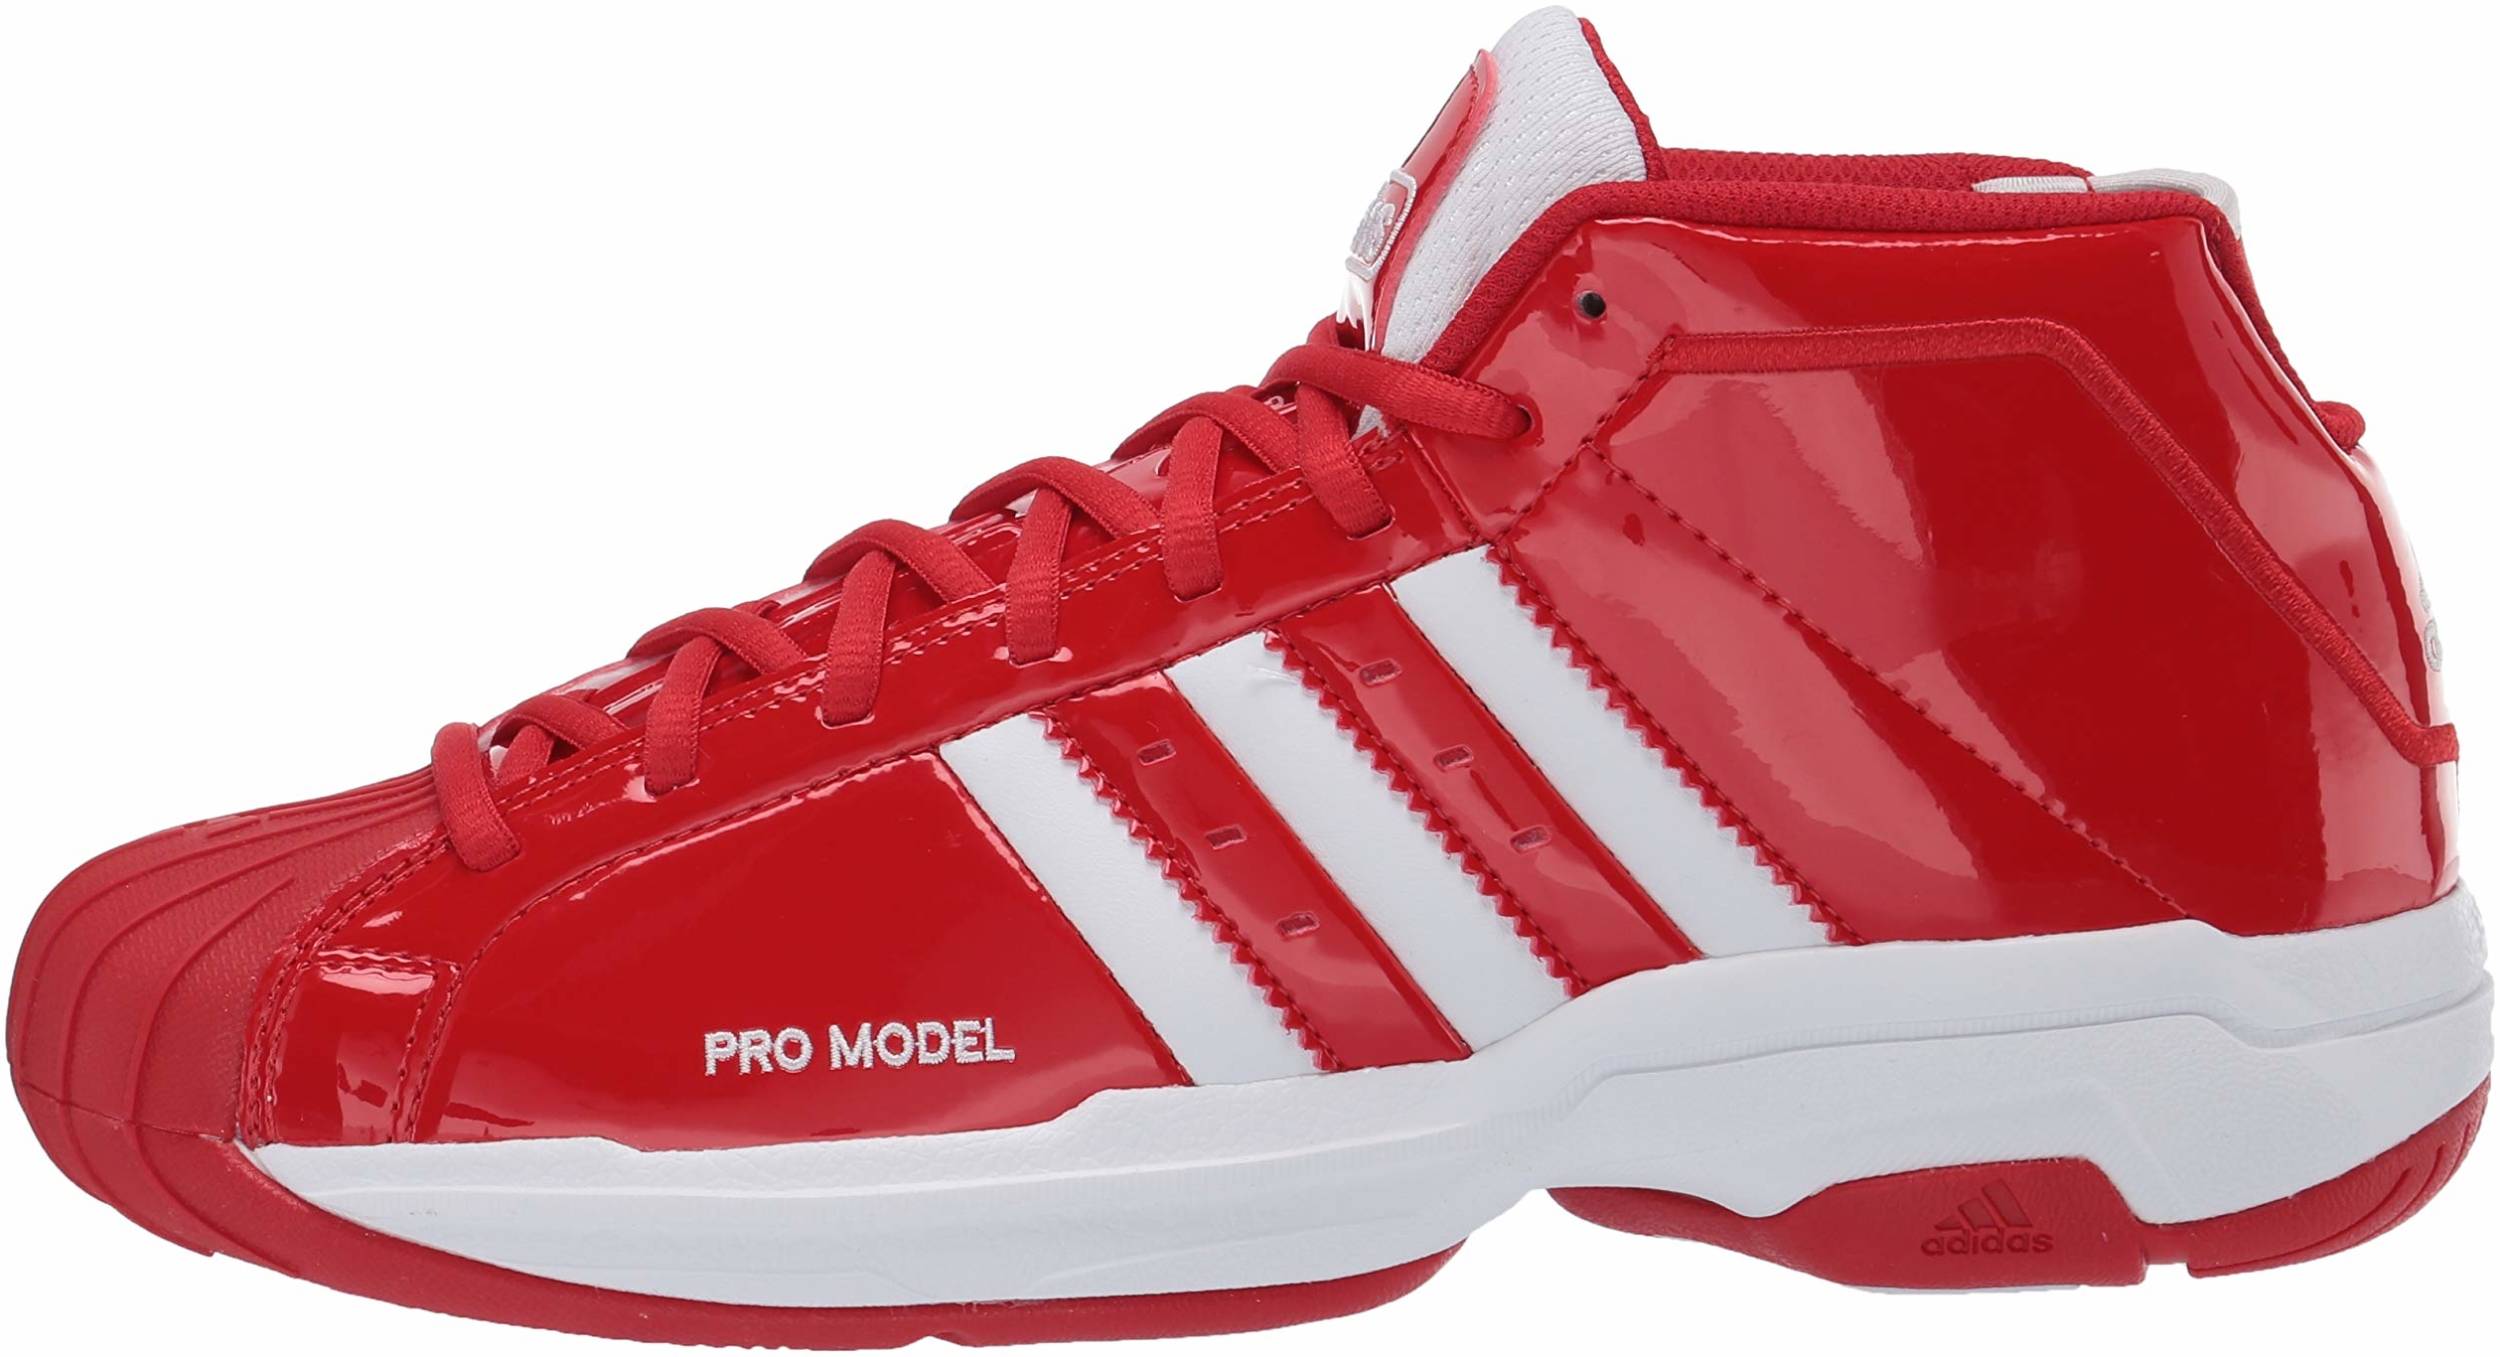 best adidas shoes for basketball